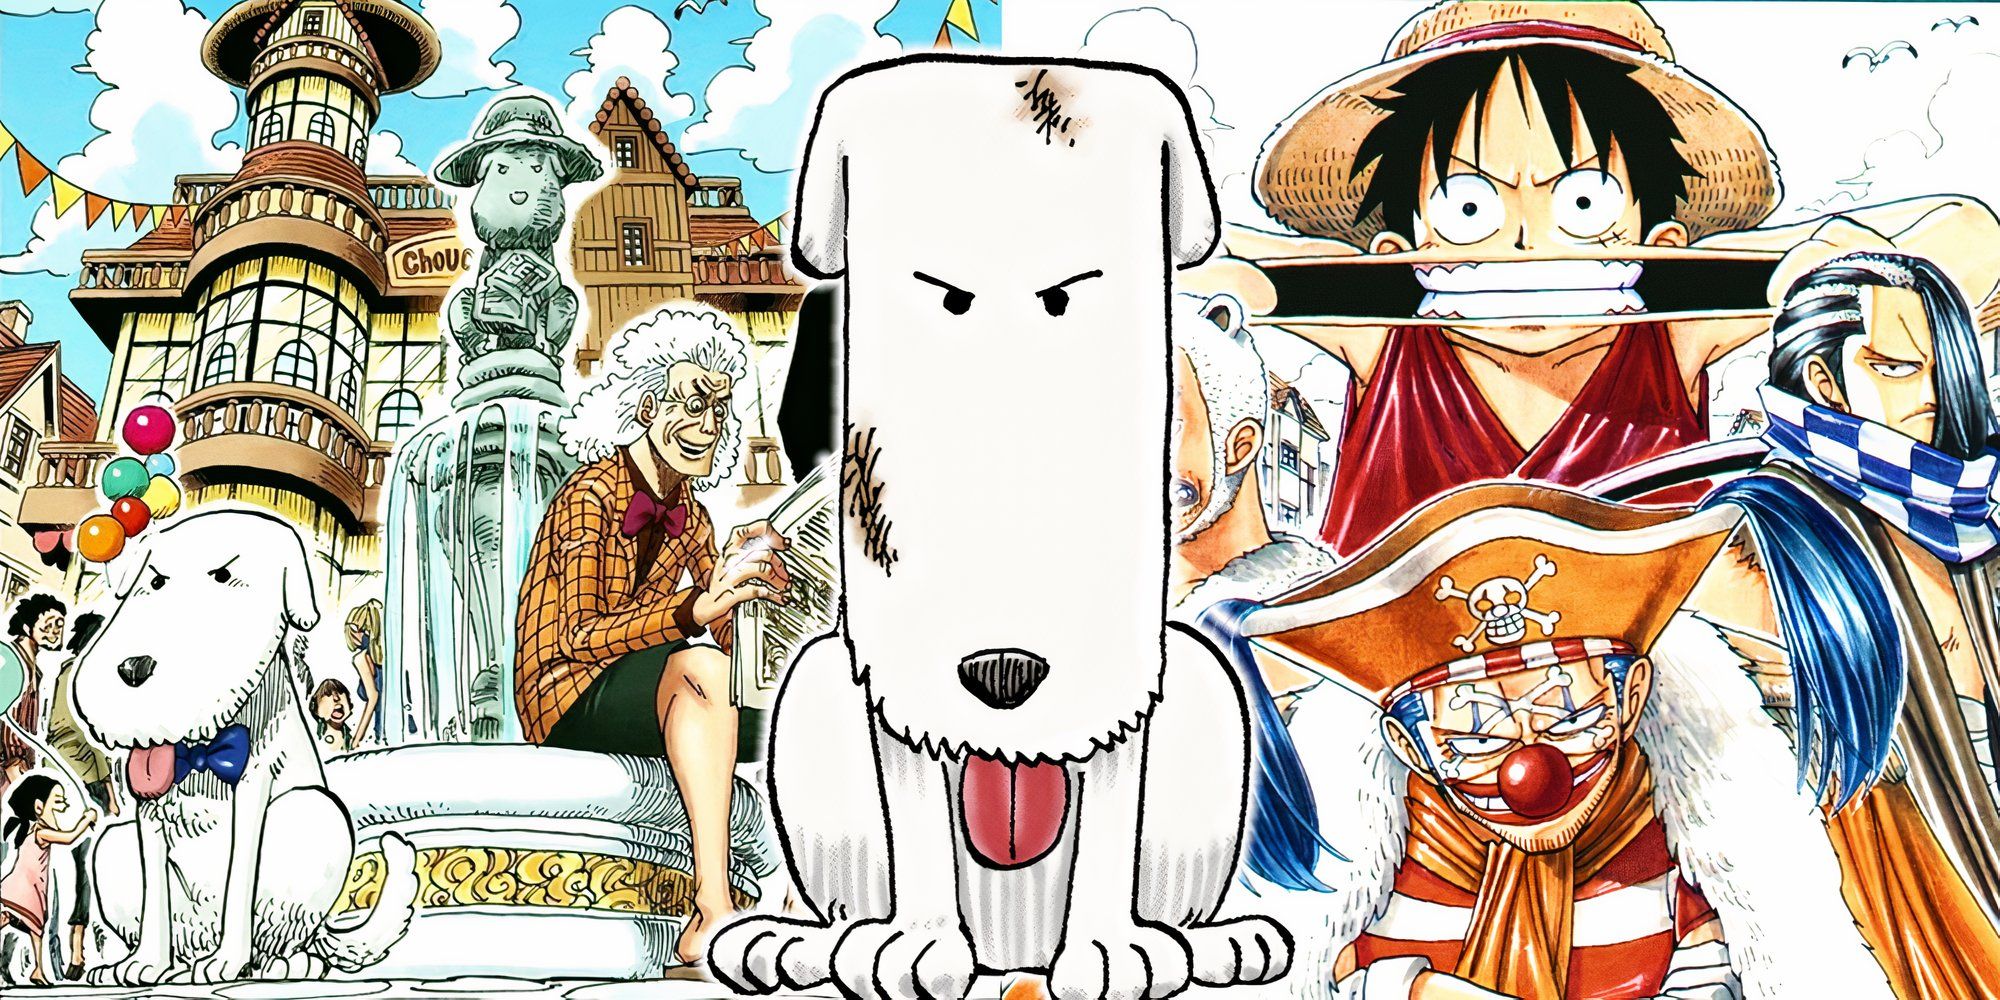 chouchou from one piece in the center. On the left: a digitally colored illustration of chouchou sitting by a fountain in front of his petshop in orange town with the mayor reading the newspaper. On the right: luffy and buggy in a digitally colored illustration featured on a chapter cover of the orange town arc in one piece